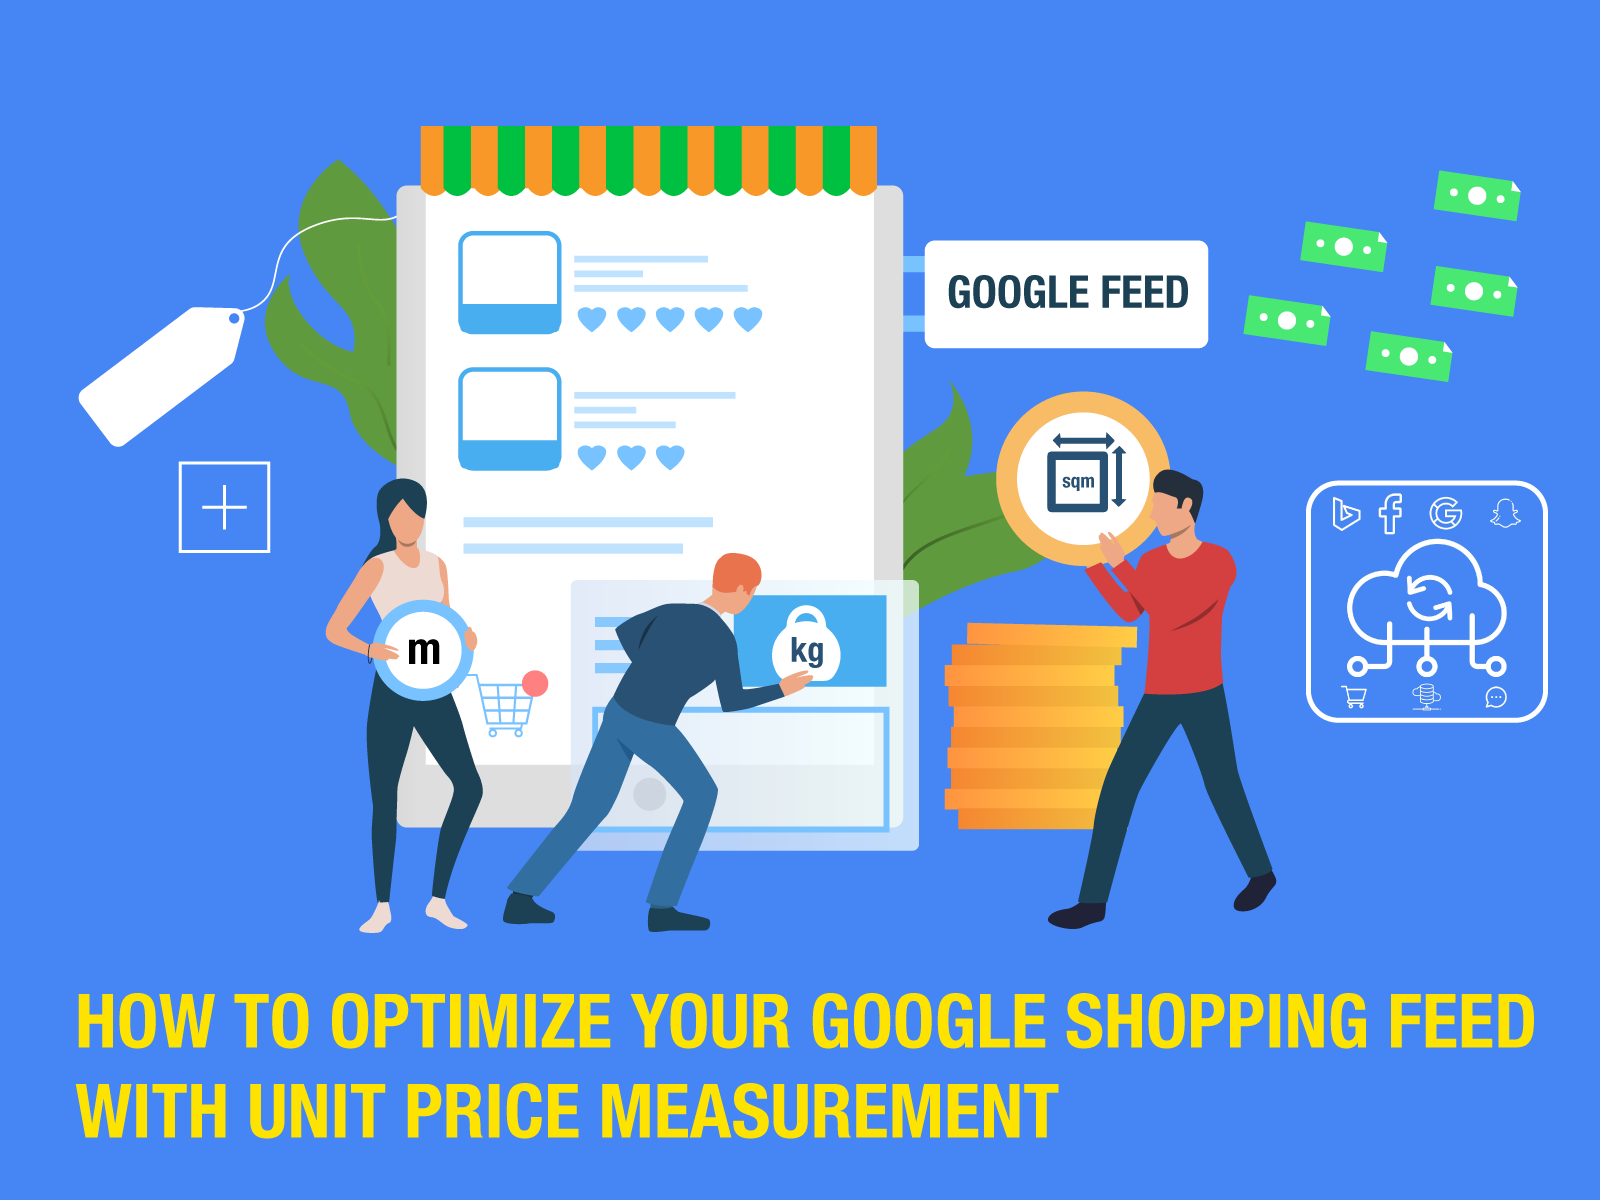 How To Optimize Your Google Shopping Feed With Unit Price Measurement